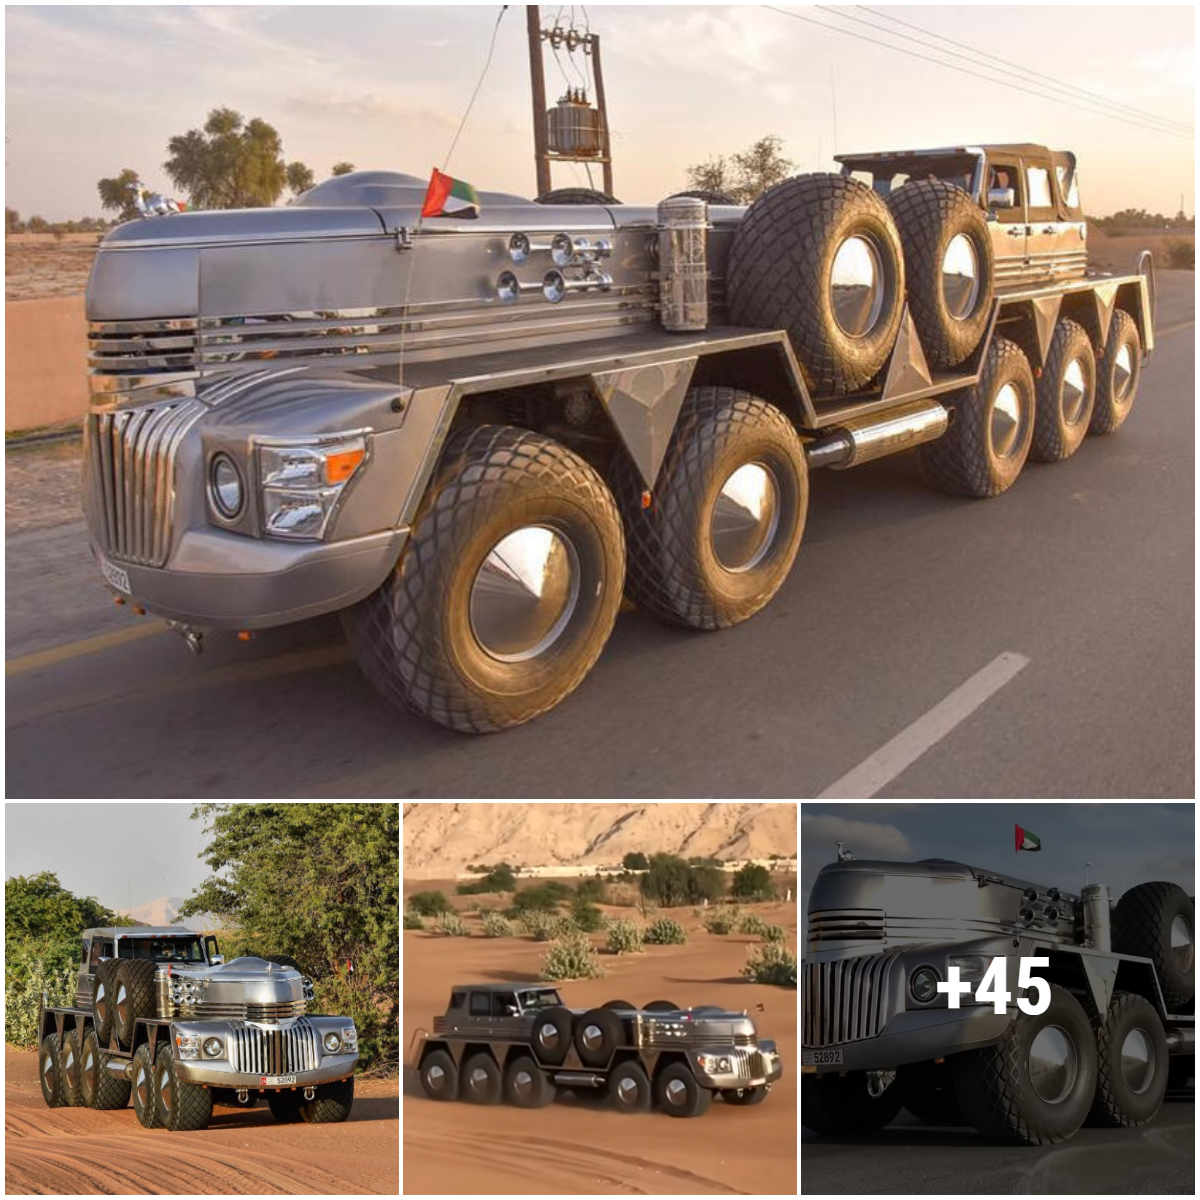 discover the world’s largest 10 wheel off-road vehicle of a billion arab billion dollars